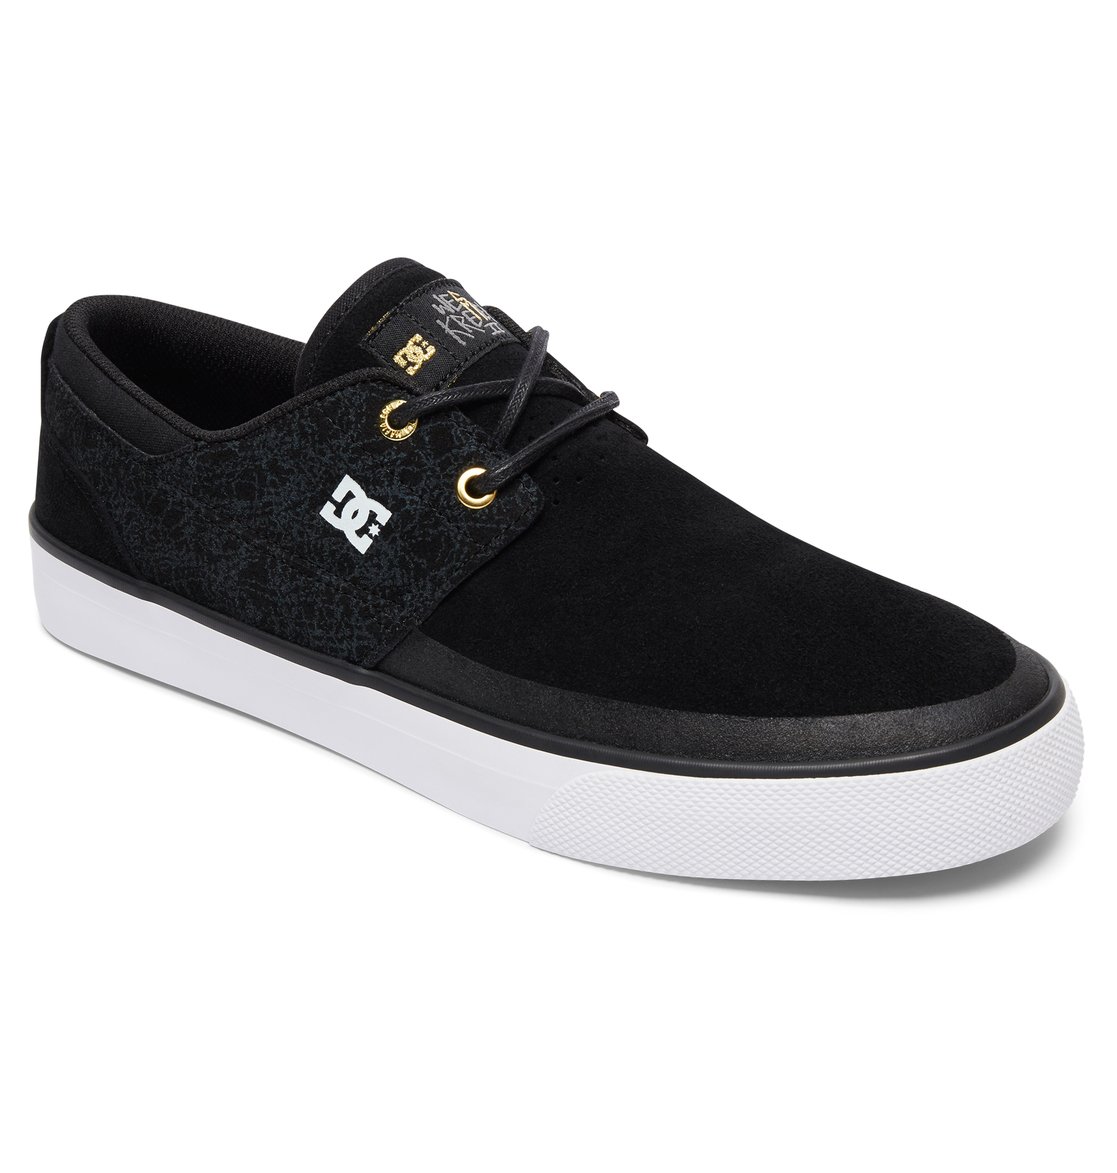 dc shoes student discount